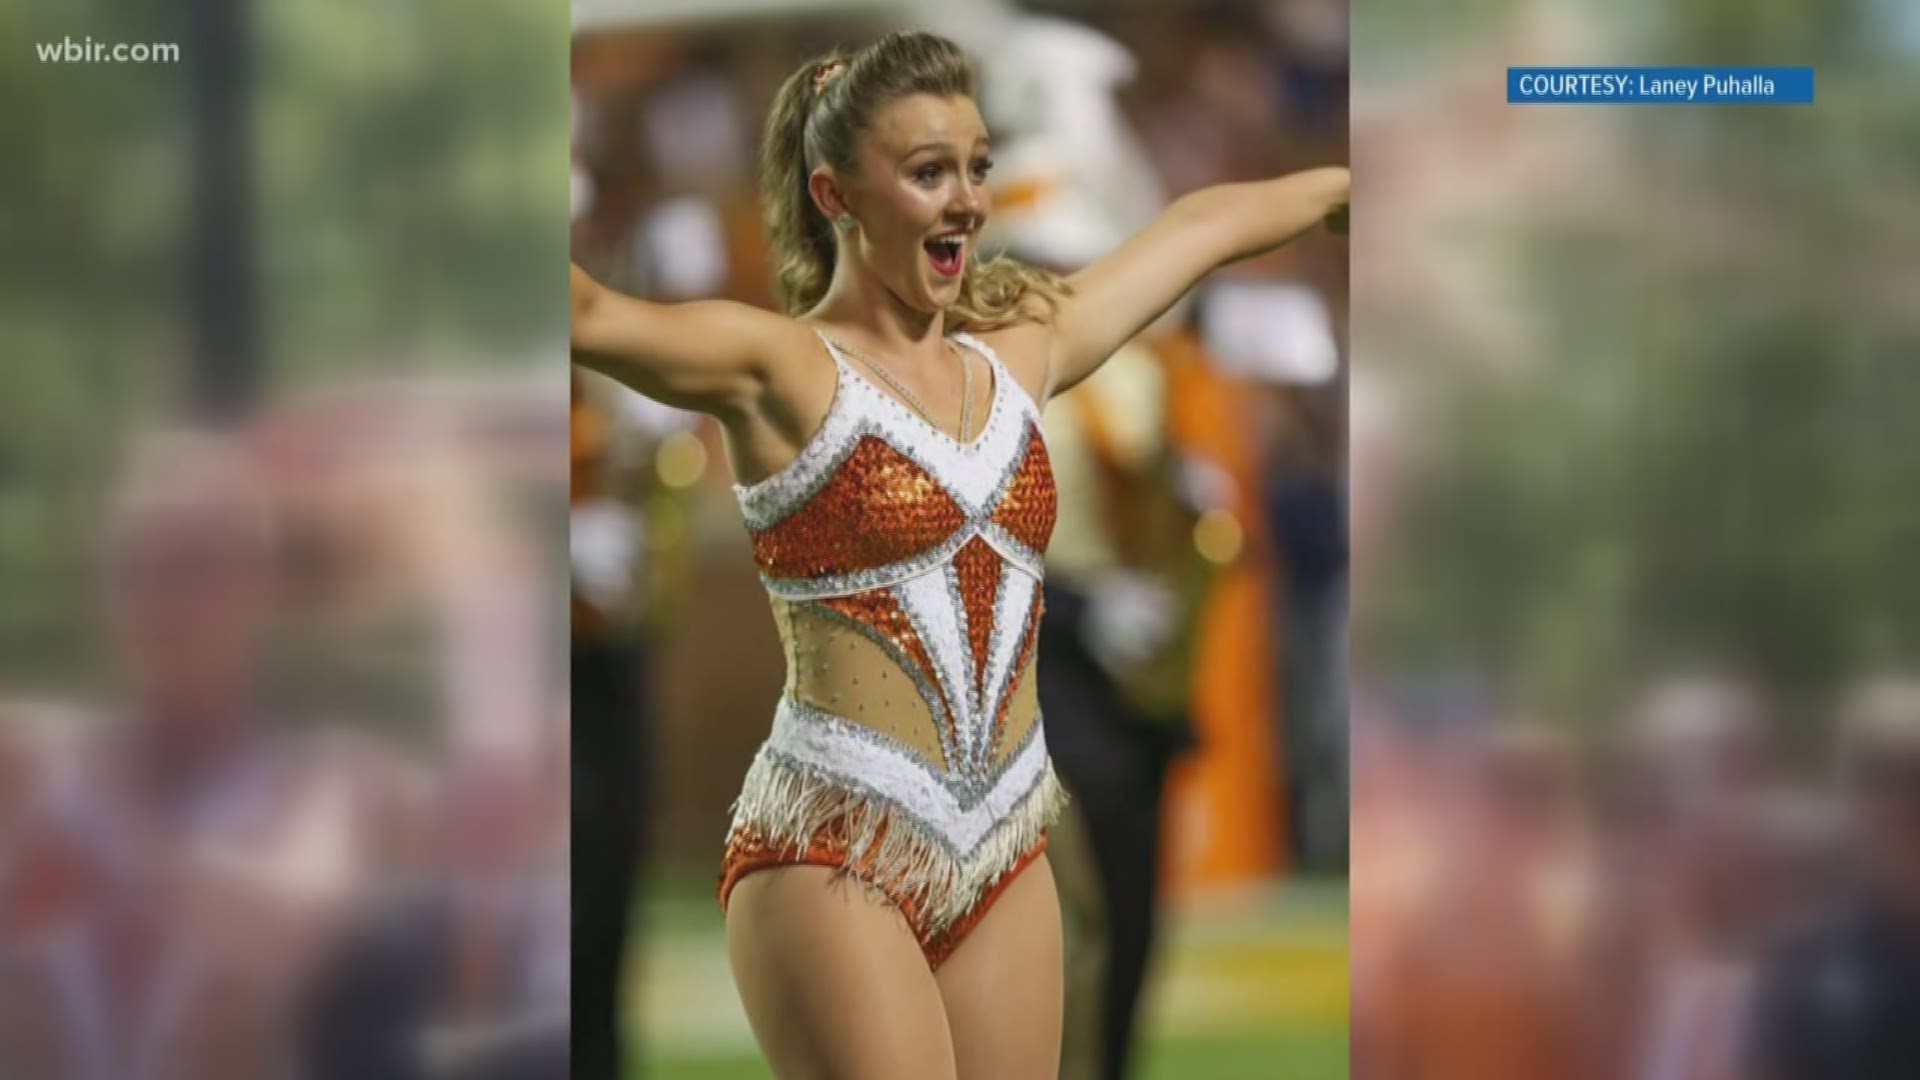 She earned a gold medal at the 2018 World Baton Twirling Championships. Now she's earned a spot in front of the band at the University of Tennessee.